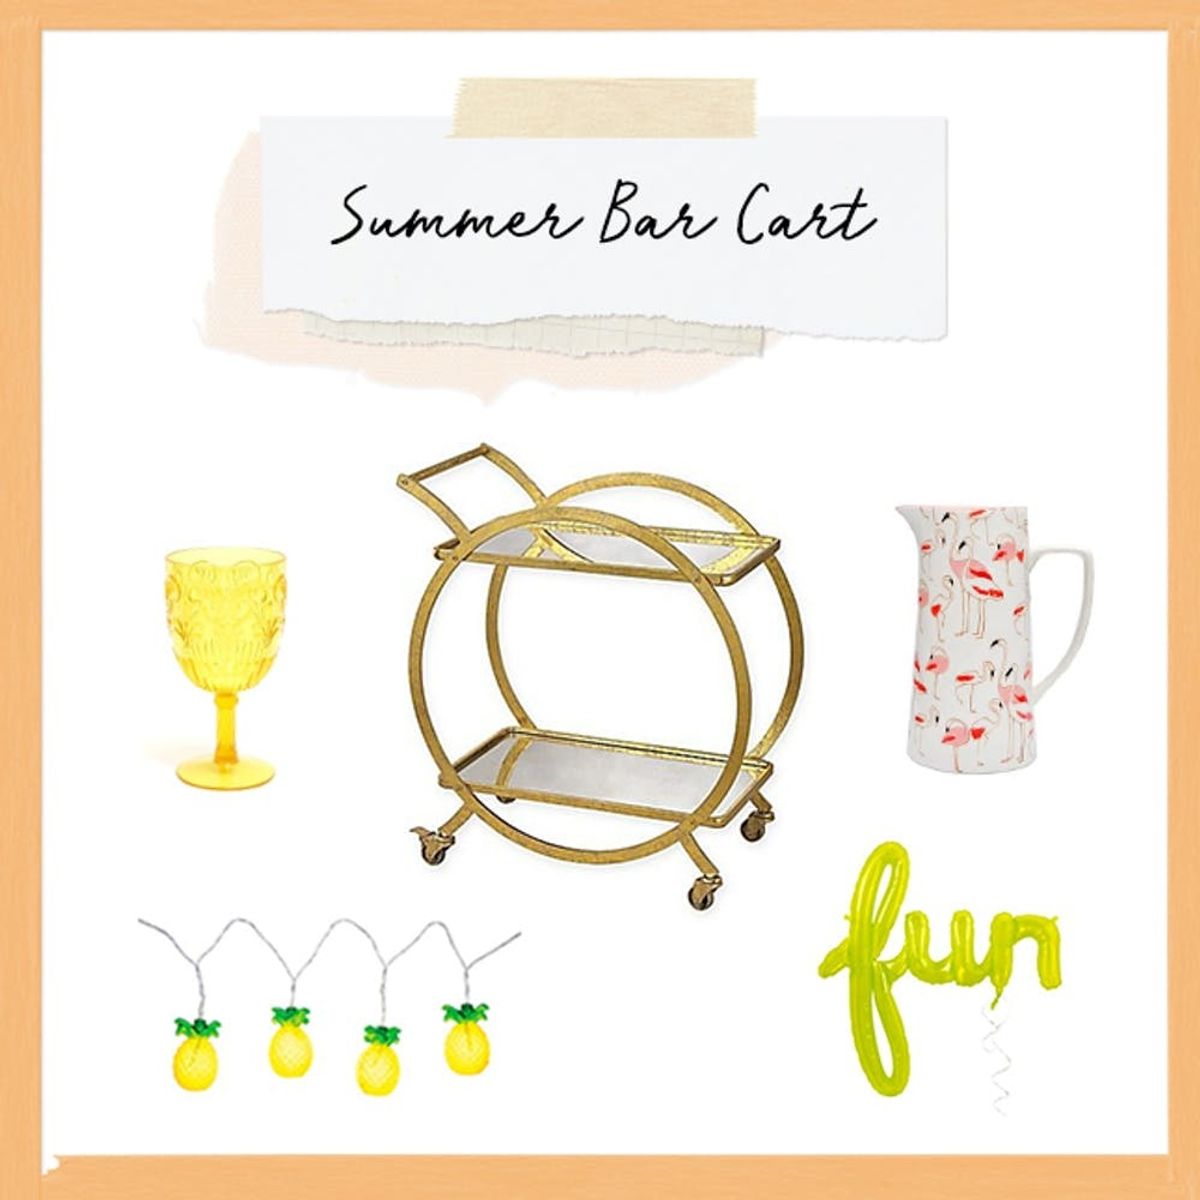 3 Ways to Jazz Up Your Bar Cart for Summer Party Season